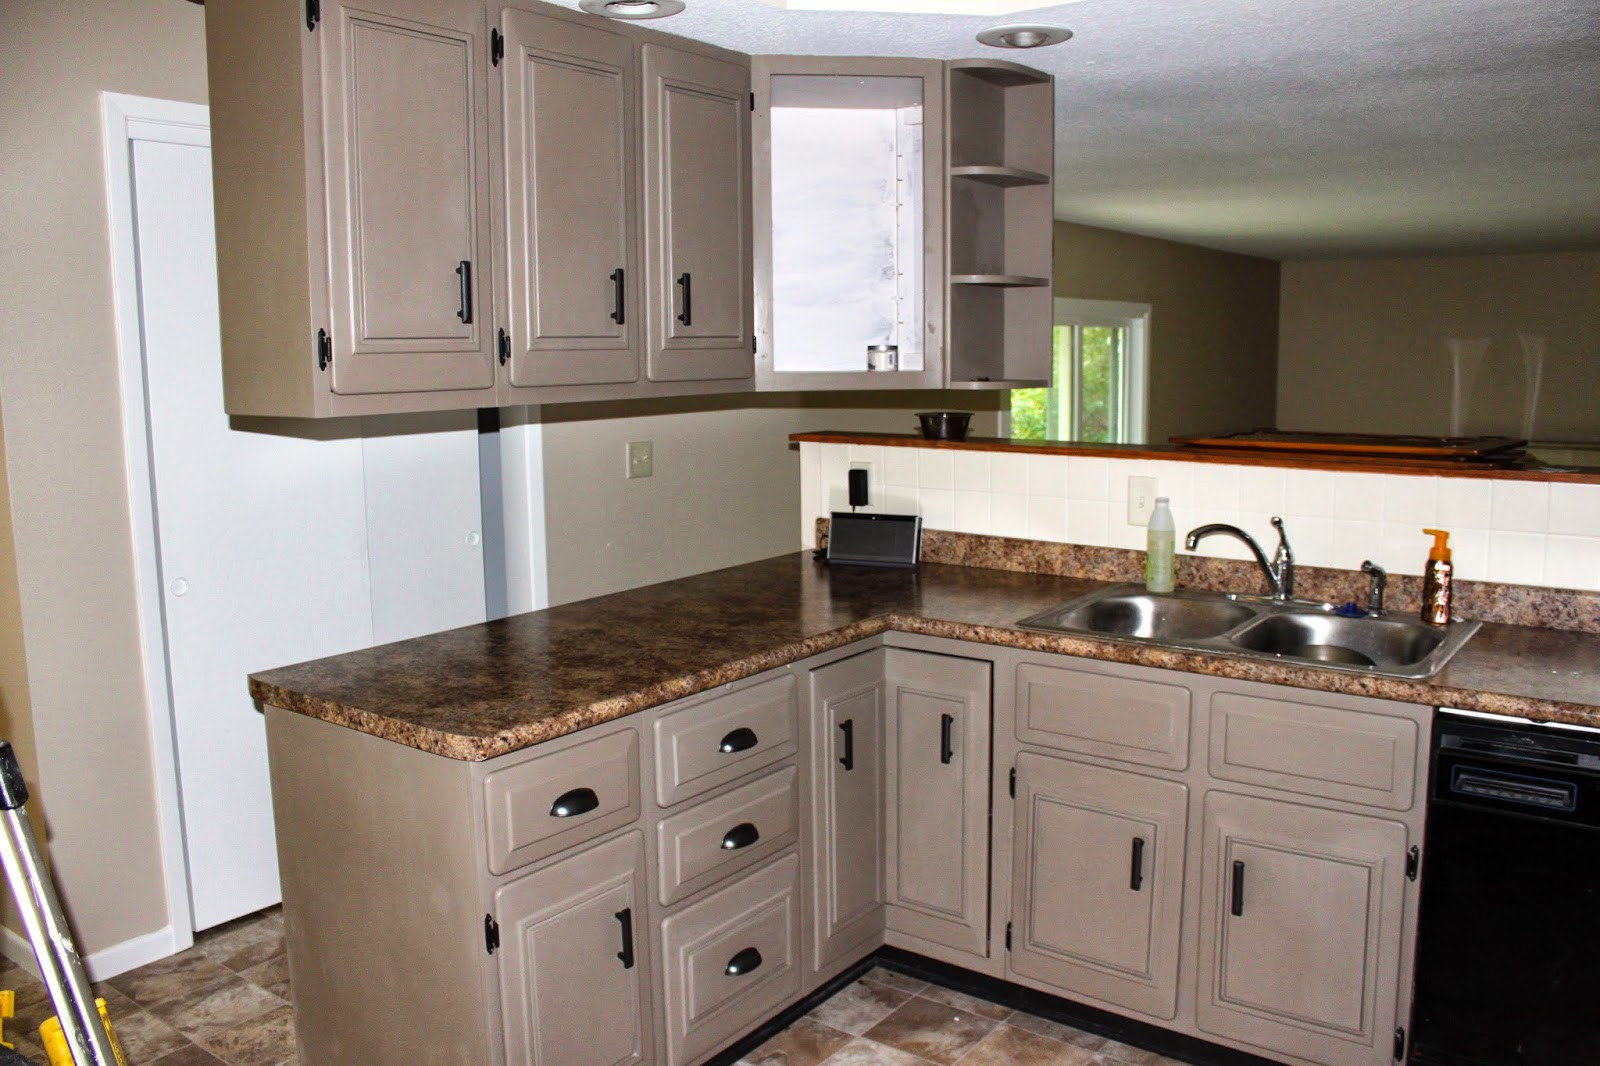 Chalk Paint Kitchen Cabinets Before And After
 Wrapped In Love Annie Sloan Chalk Paint